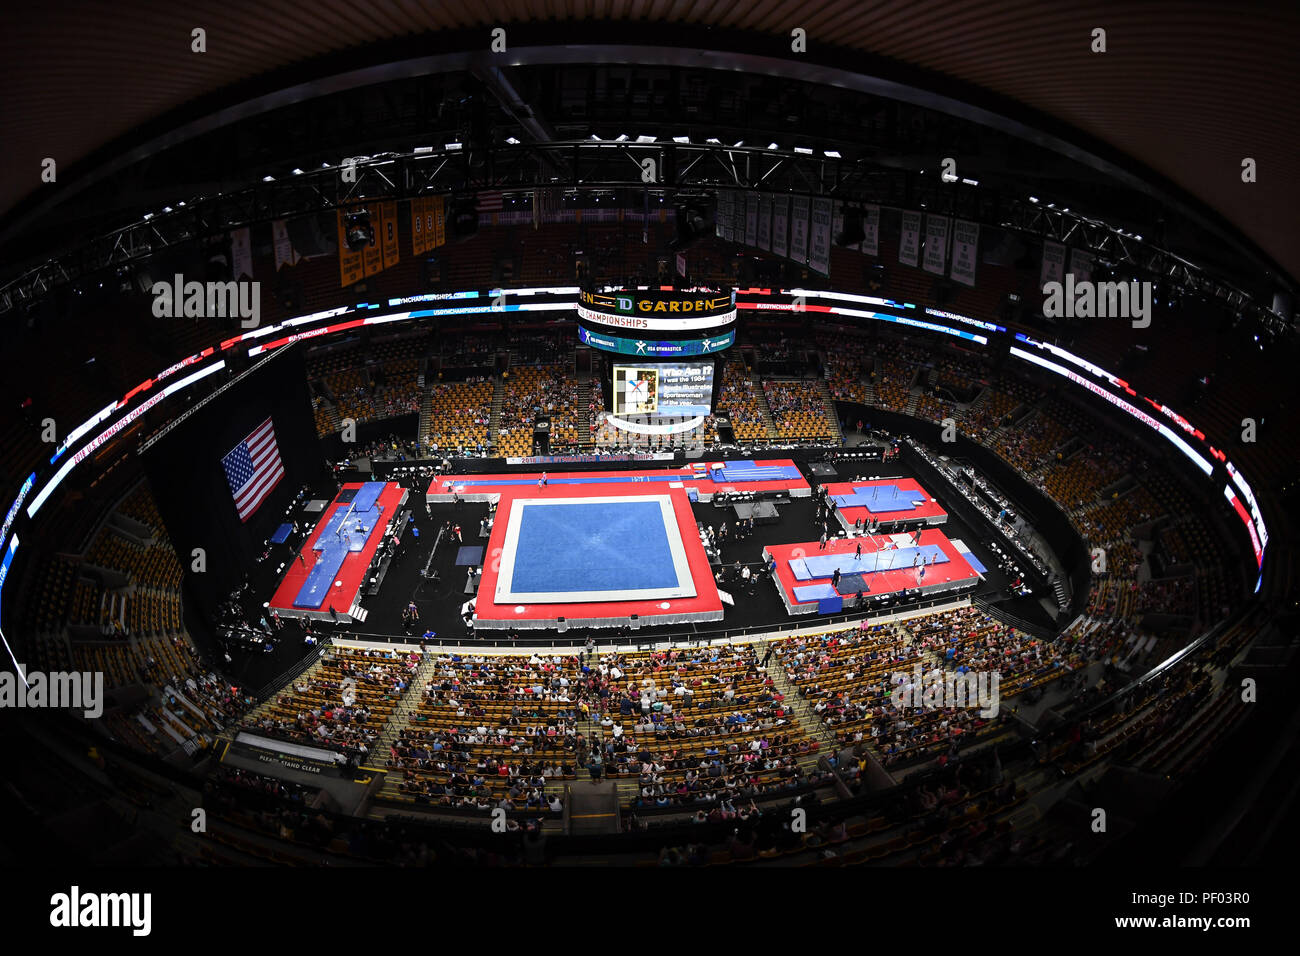 Boston, Massachussetts, USA. 17th Aug, 2018. The crowd waits for the competition to start prior the first round of competition at TD Garden in Boston, Massachusetts. Credit: Amy Sanderson/ZUMA Wire/Alamy Live News Stock Photo